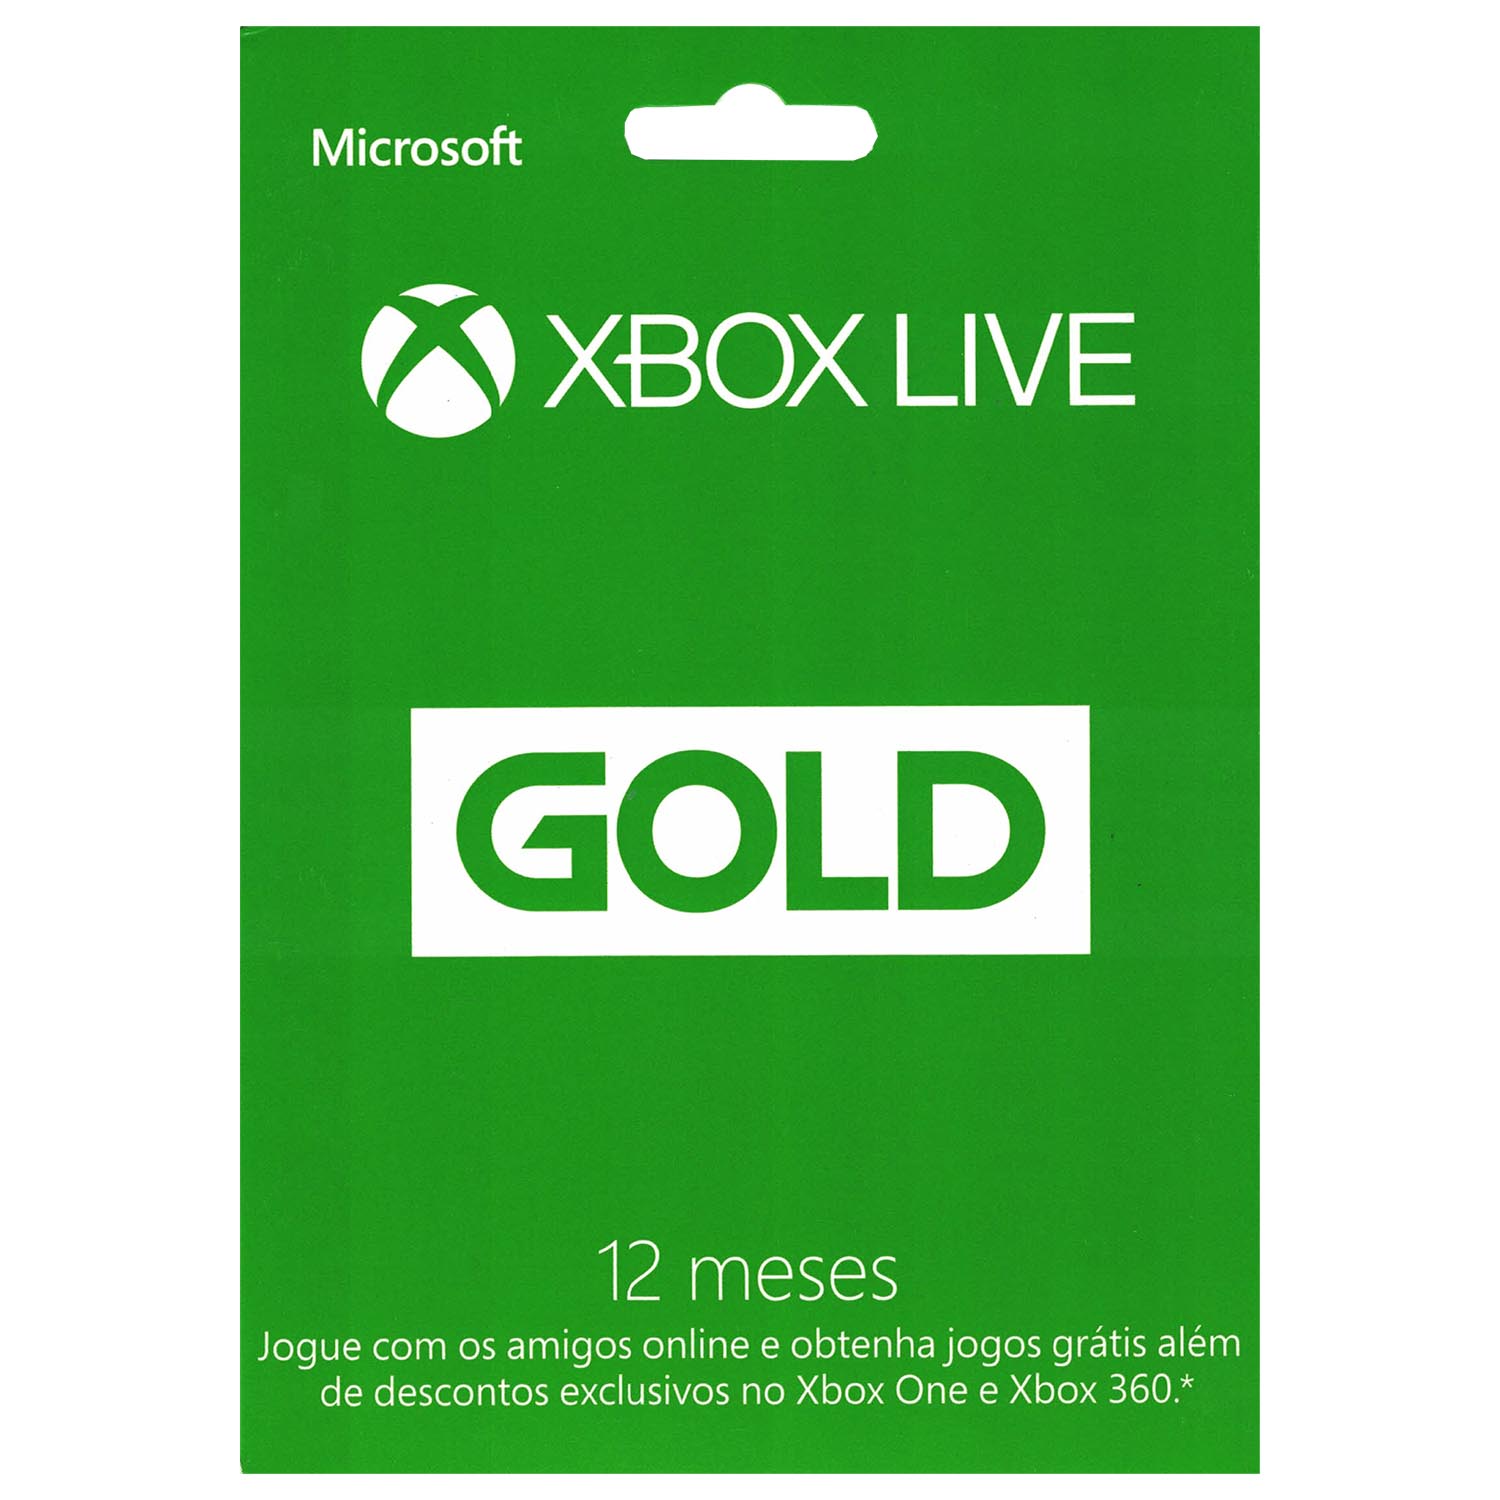 Does an unused Xbox Live Gold card expire